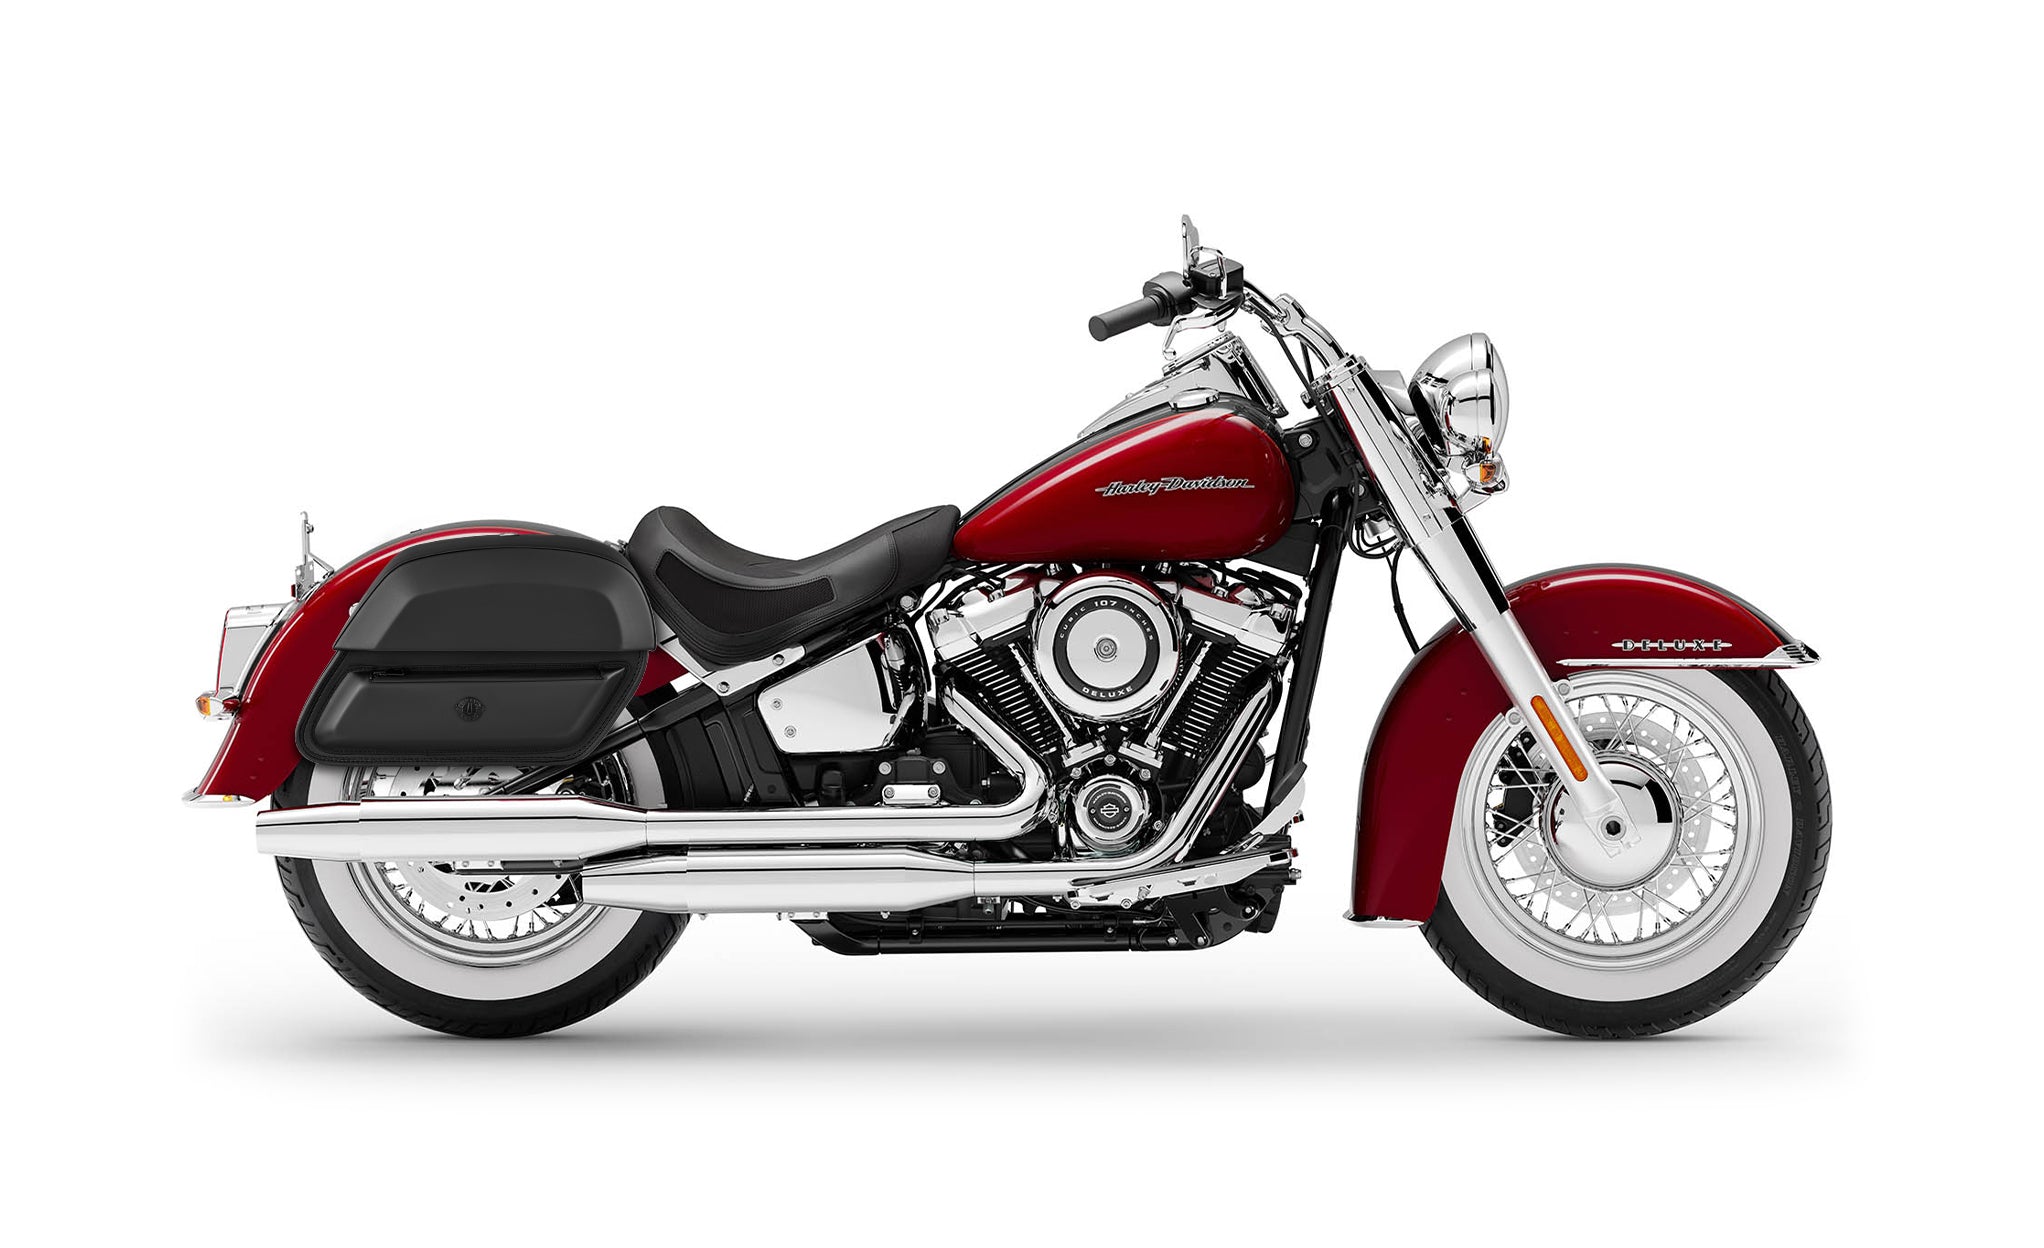 28L - Pantheon Medium Quick-Mount Motorcycle Saddlebags For Harley Softail Deluxe FLDE @expand